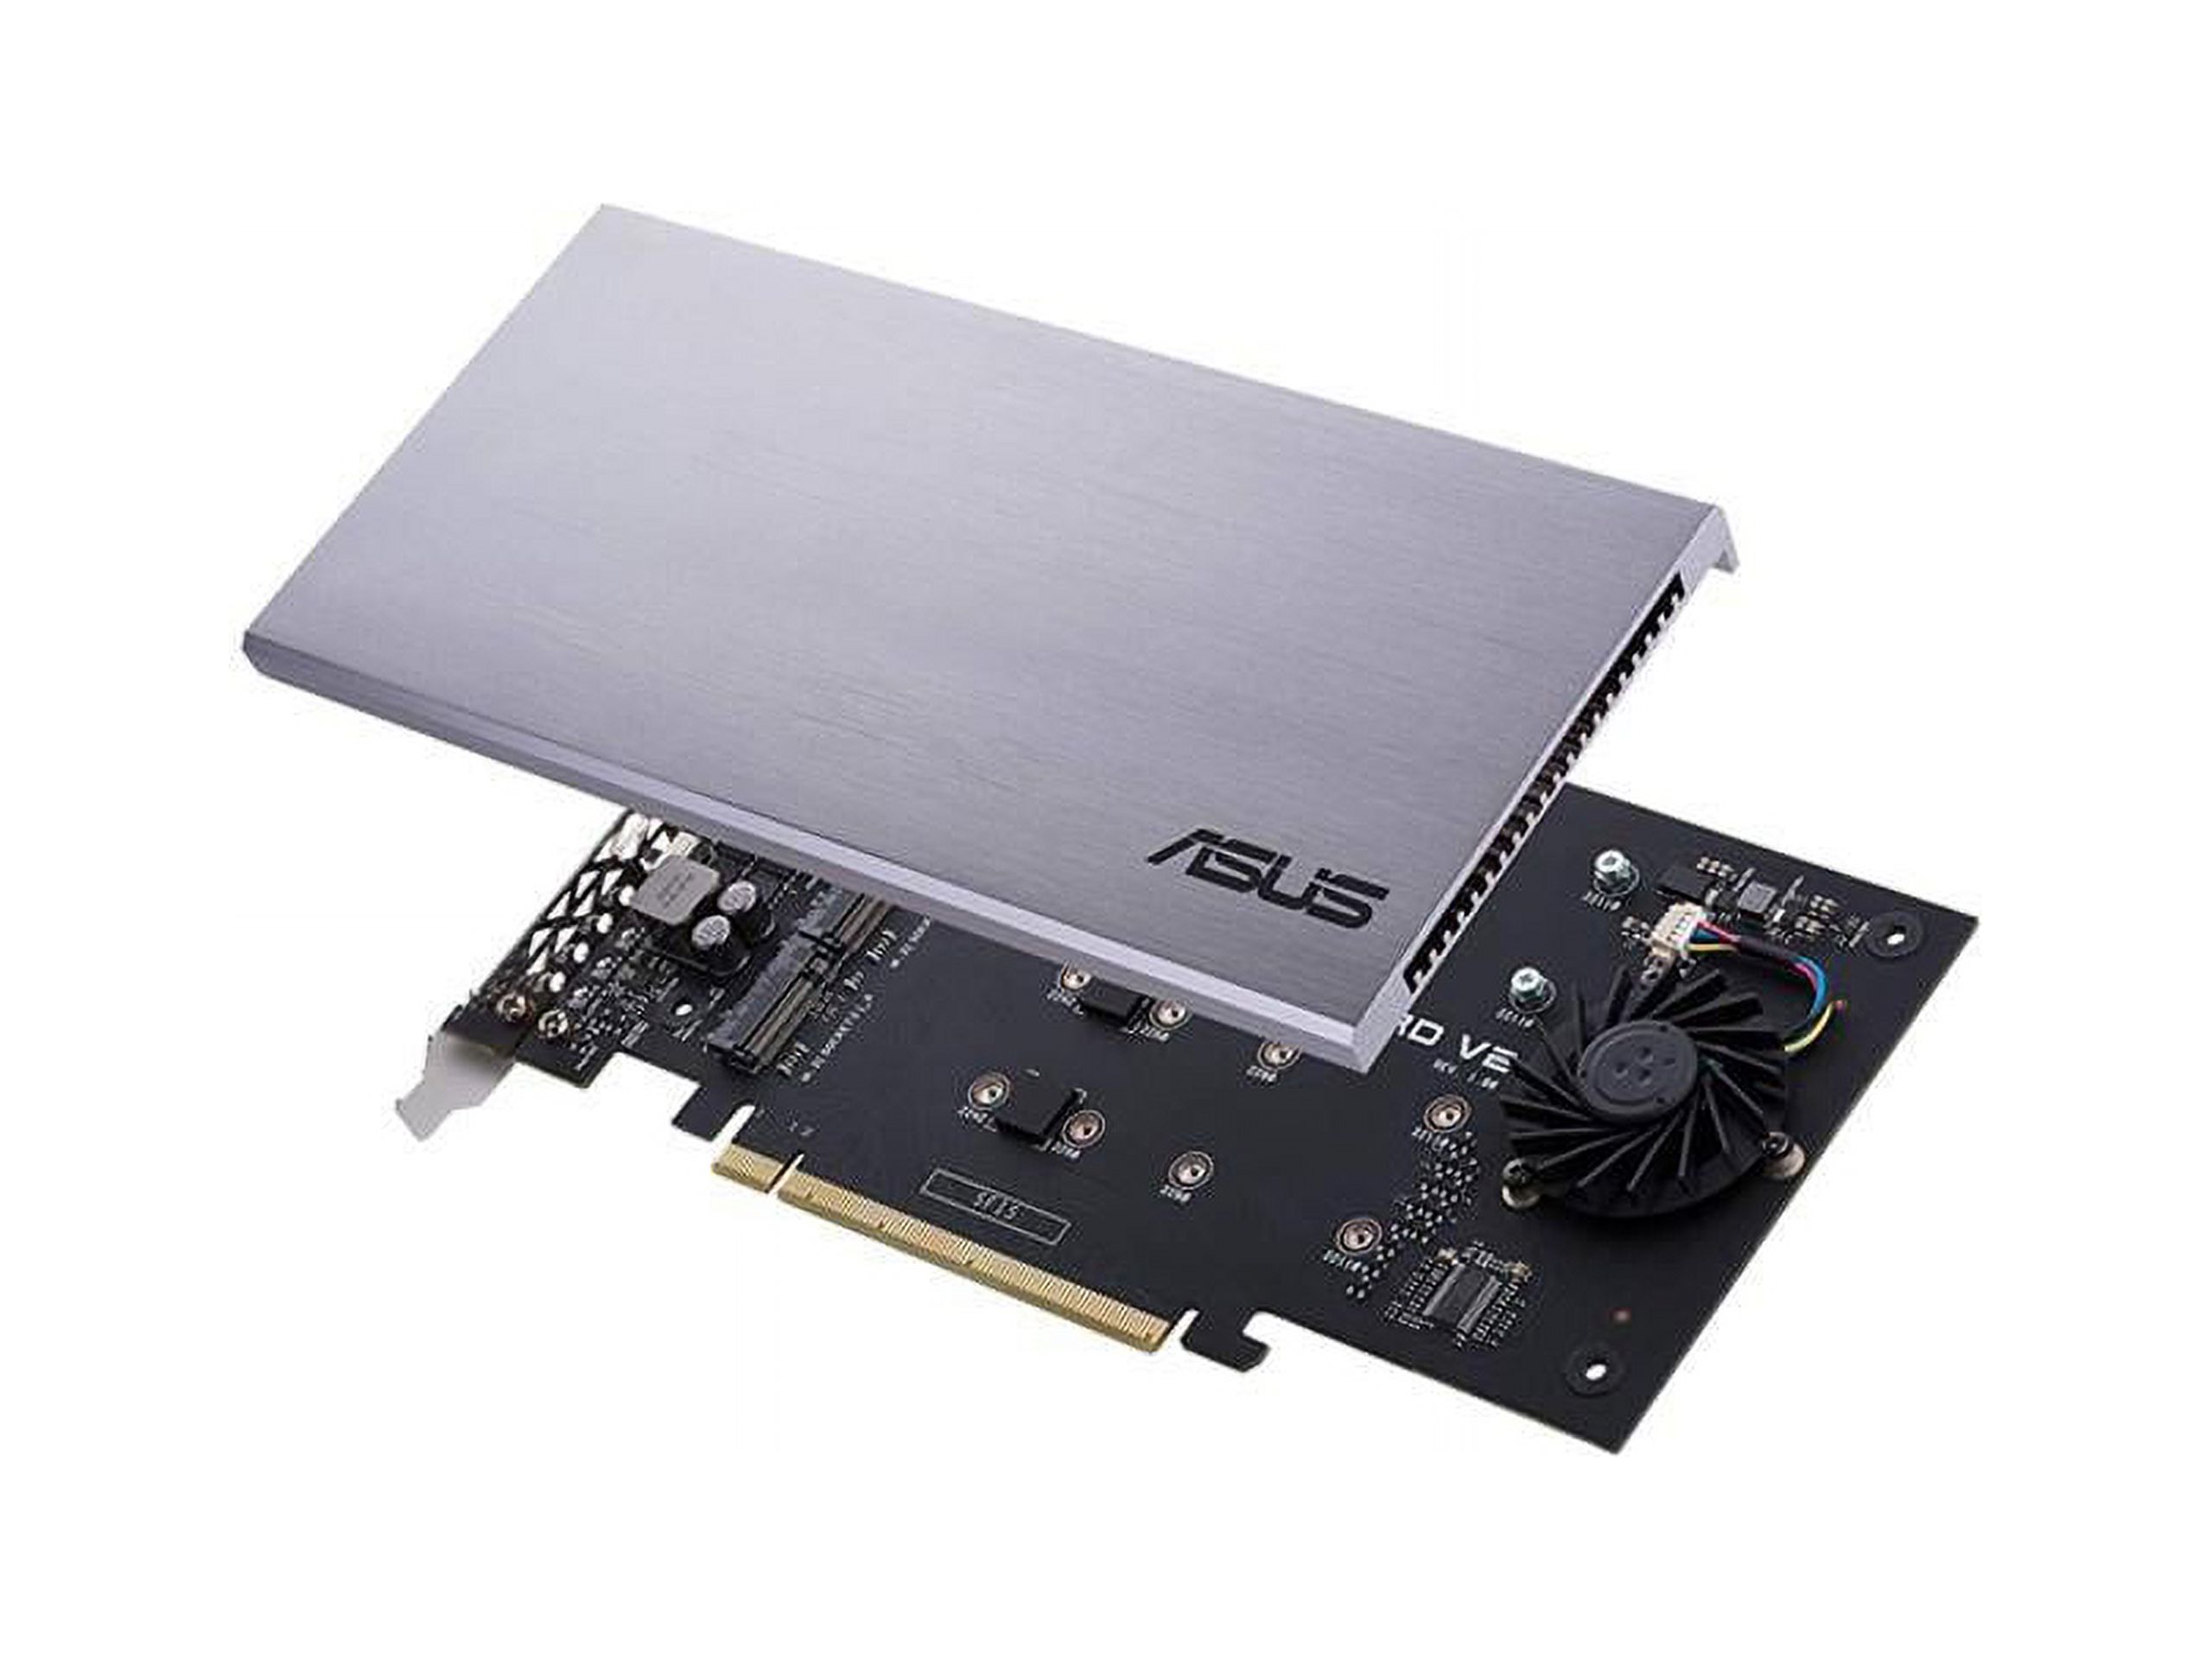 ASUS Hyper M.2 x16 PCIe 3.0 x4 Expansion Card V2 Supports 4 x NVMe M.2 (2242/2260/2280/22110) Up to 128 Gbps for Intel VROC and AMD Ryzen Threadripper NVMe RAID - image 1 of 5